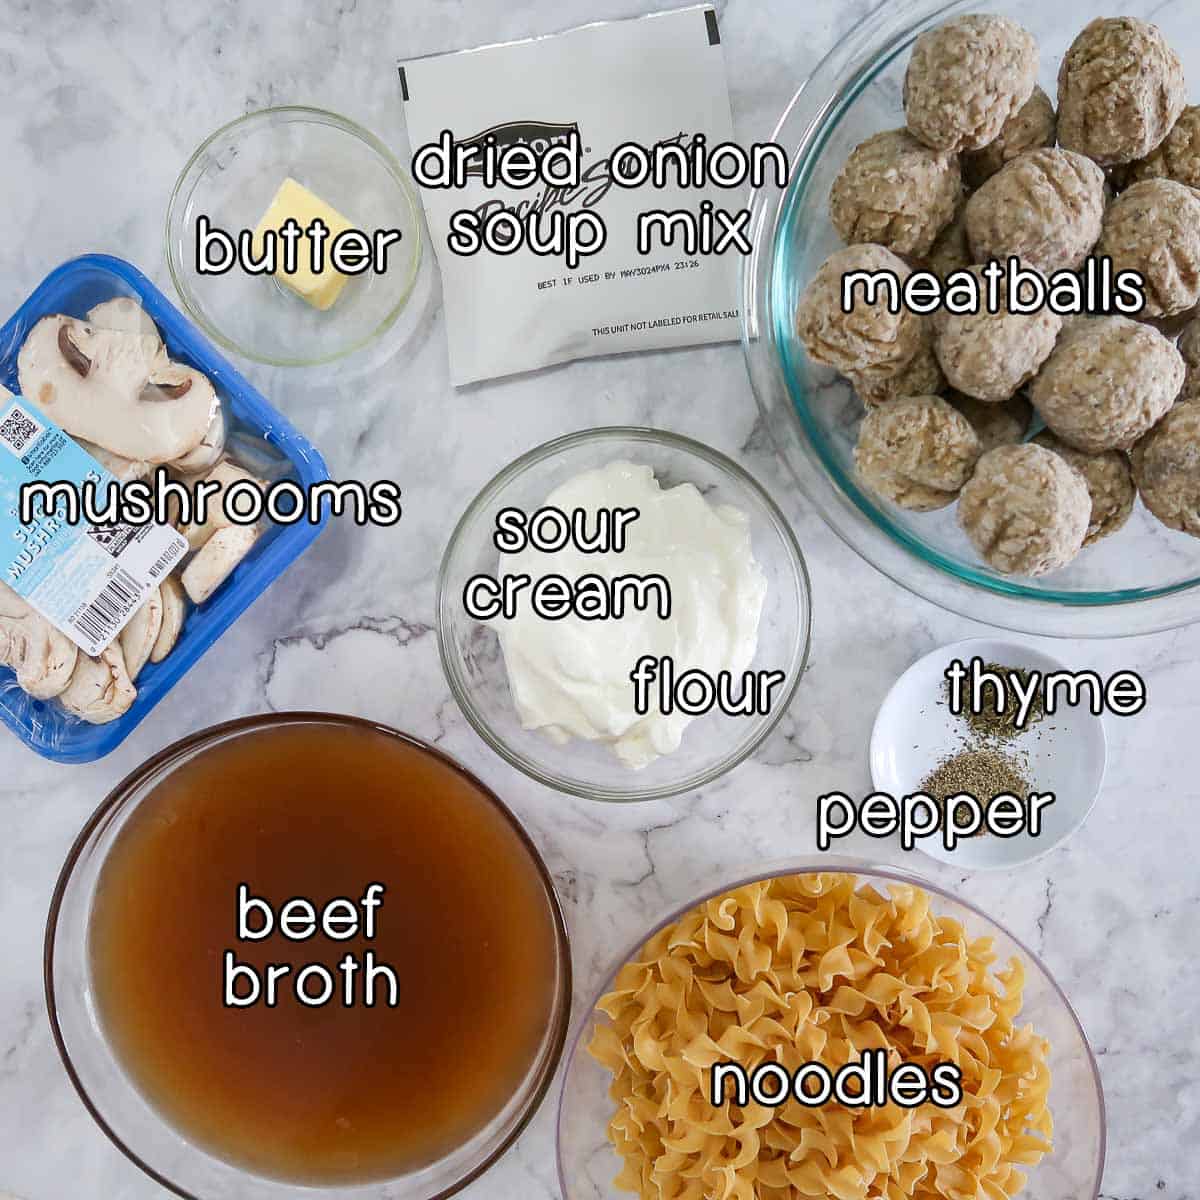 Overhead shot of ingredients - butter, dried onion soup mix, meatballs, mushrooms, sour cream, flour, thyme, pepper, noodles, and beef broth.